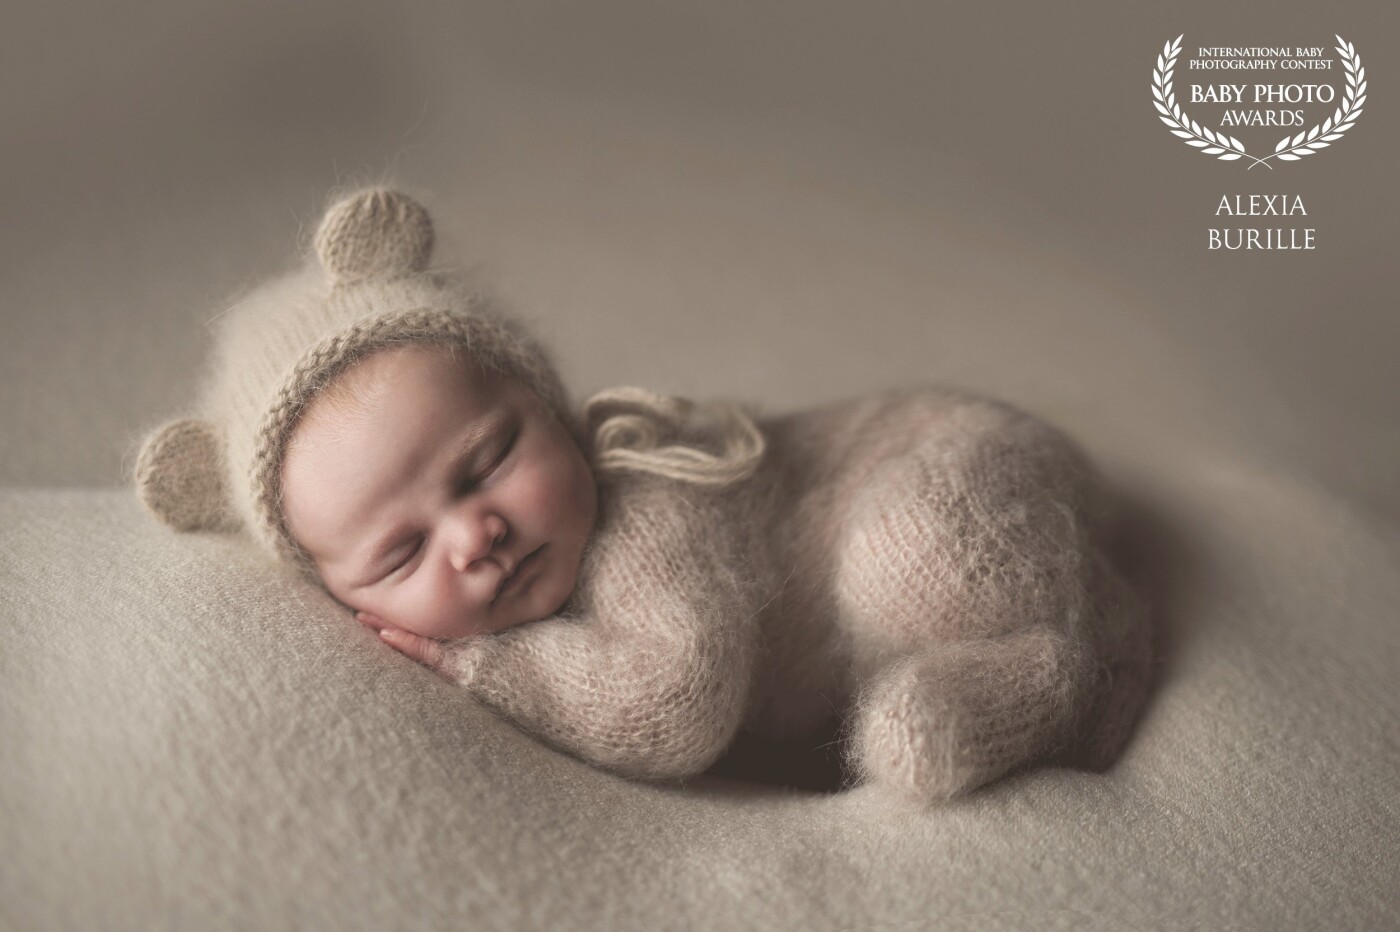 At the beginning I started to create fantasy picture, and then I wanted to do the opposite... so I imagined a simple picture with sweet texture. The result is : the purity and the sweet softness of the first days of life for this little girl. 